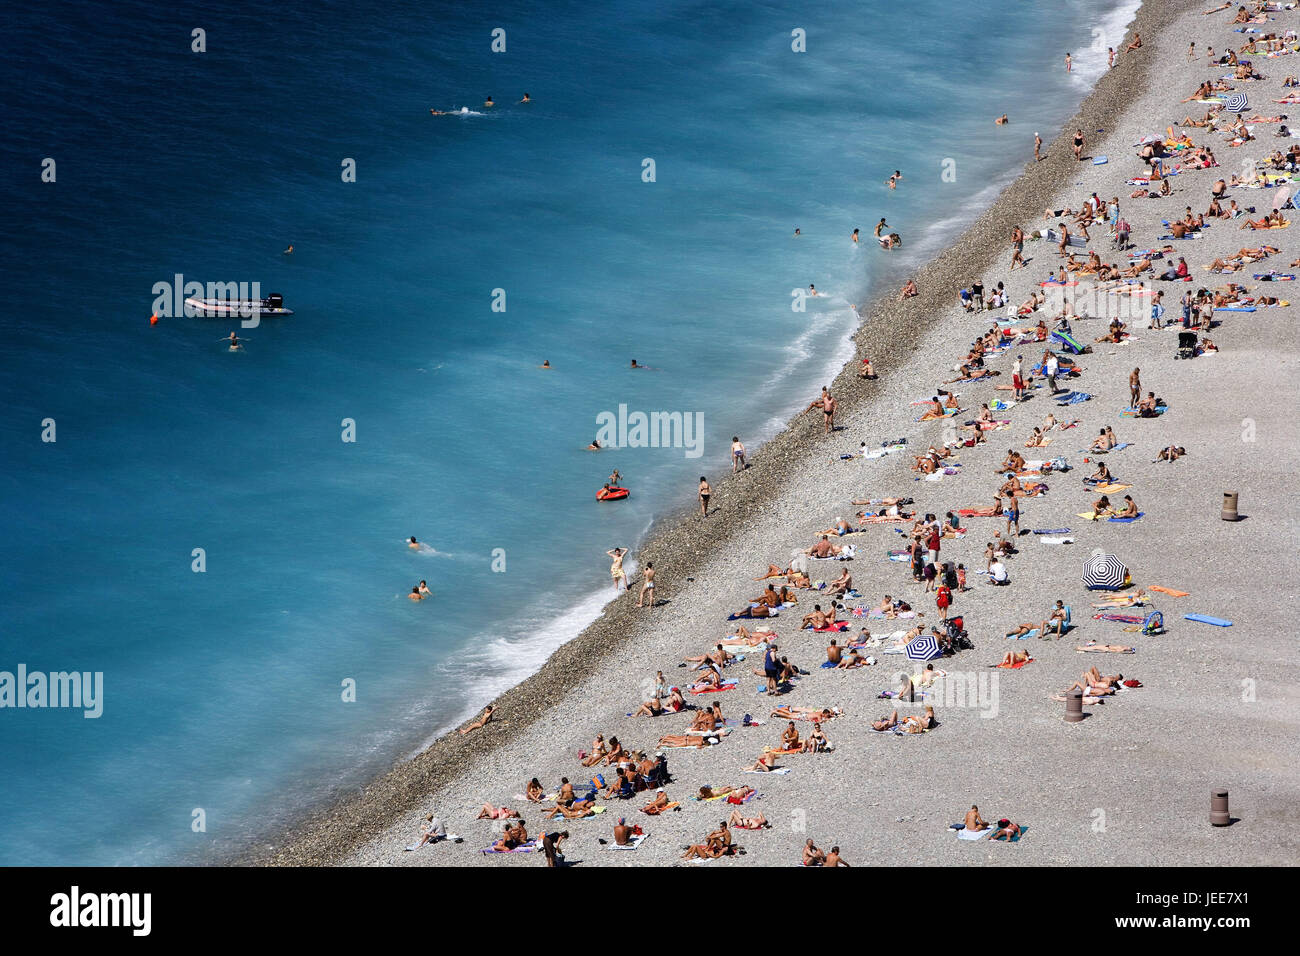 France, Provence, Cote d'Azur, Nice, beach, bathers, from above, the South of France, Mediterranean coast, beach, person, tourist, solar bath, rest, détente, vacation, holidays, summer vacation, beach holiday, destination, tourism, Stock Photo